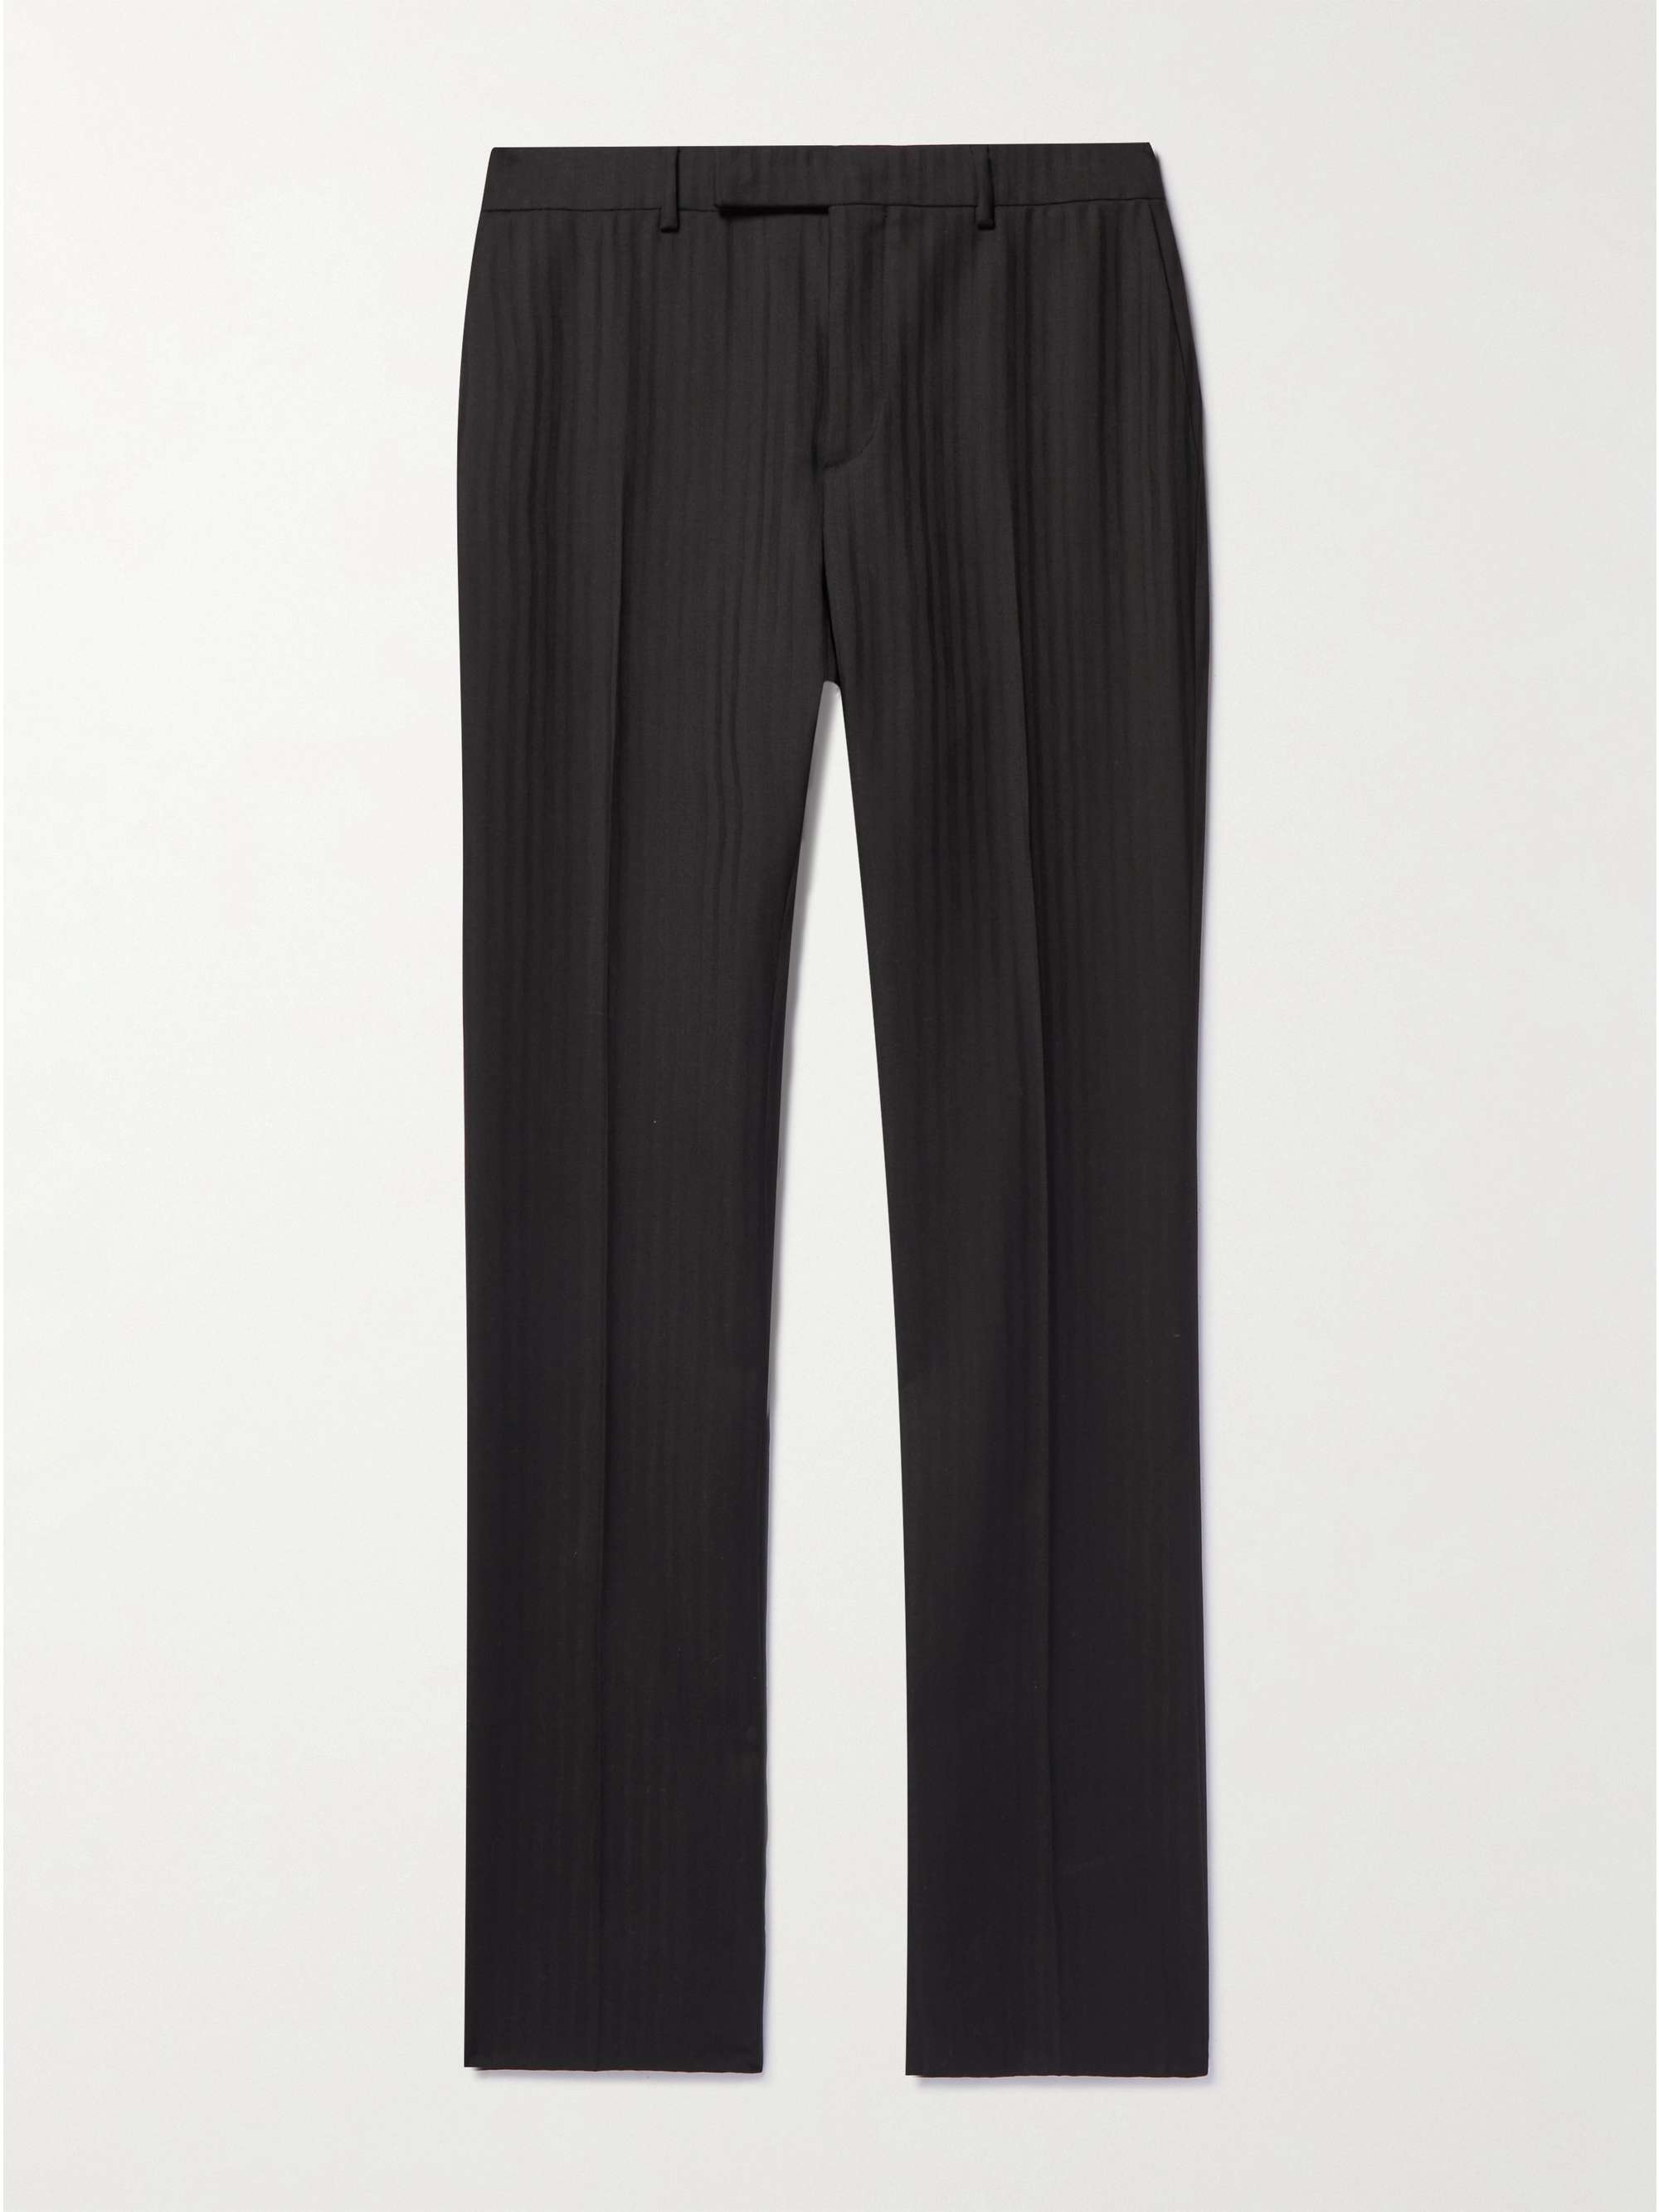 Pants Black Wool, Mohair and Silk Twill